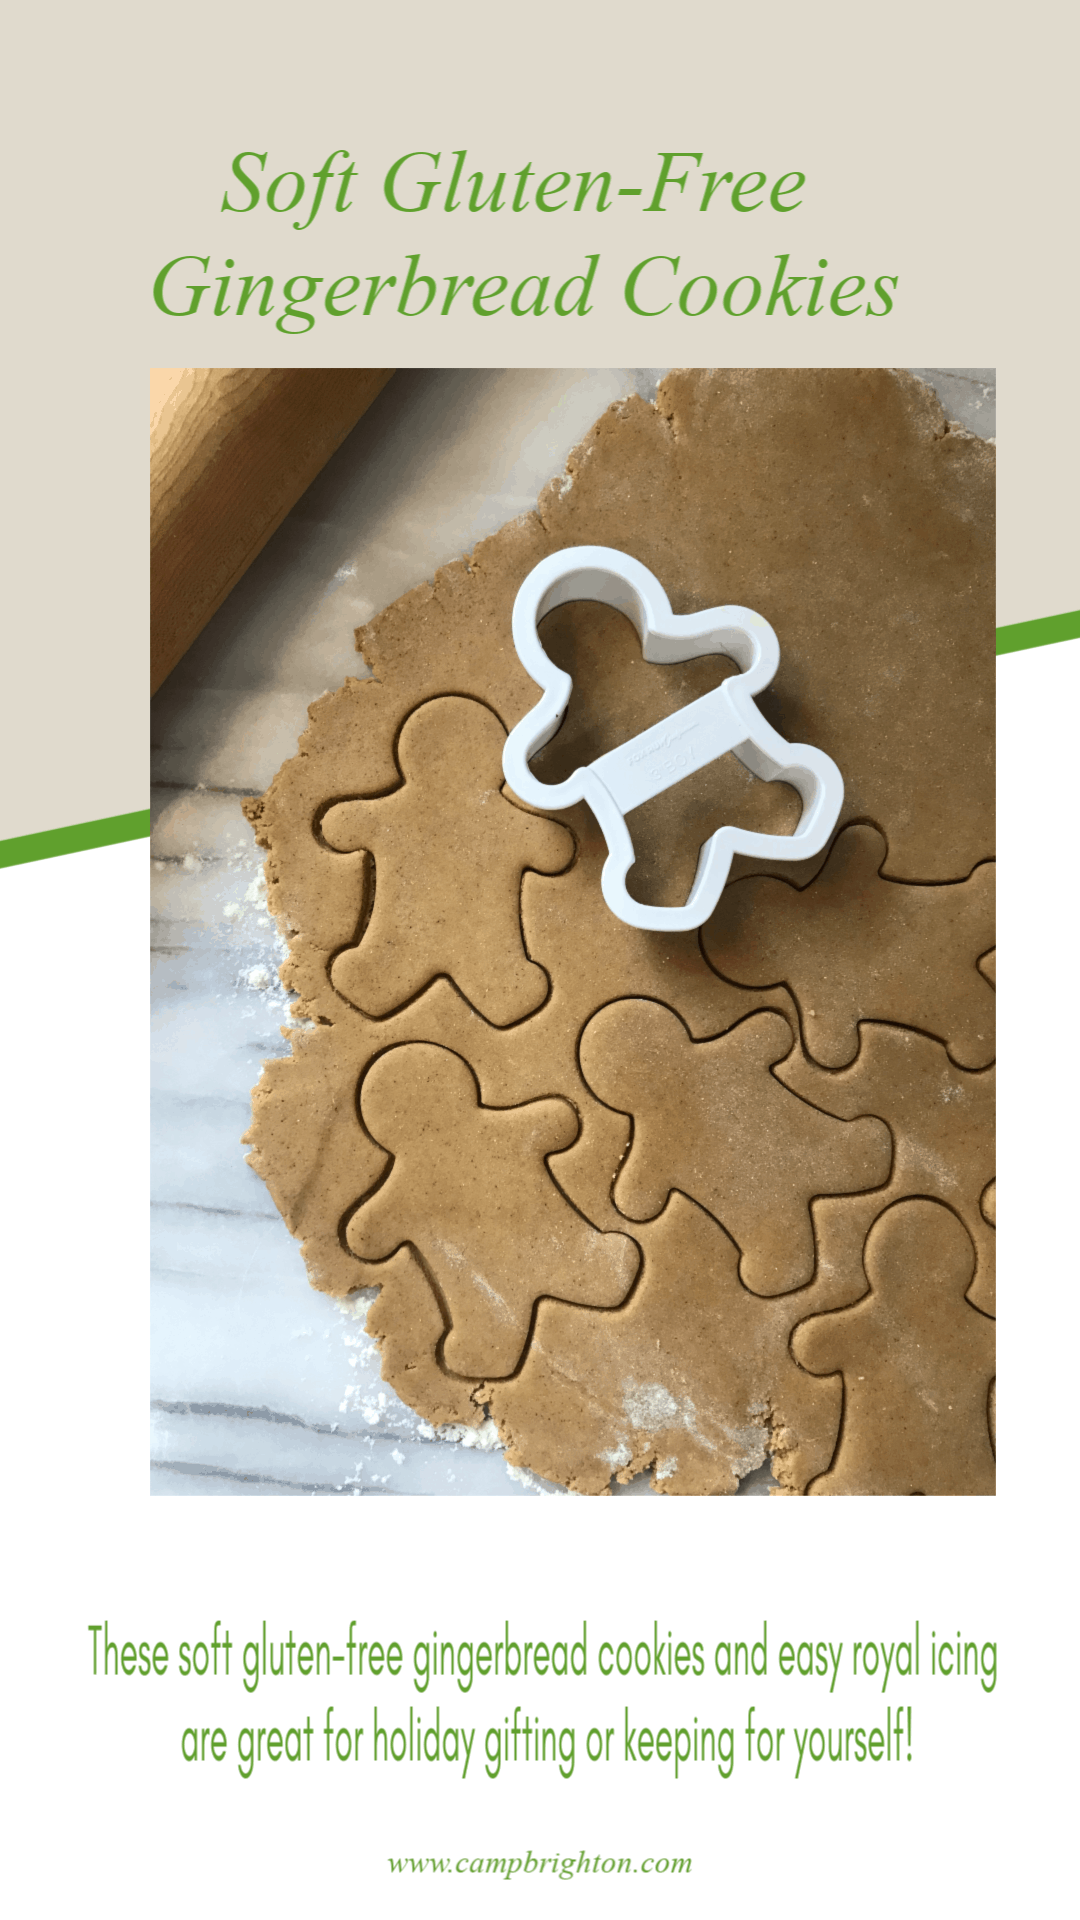 Soft Gluten-free Gingerbread Cookies With Easy Royal Icing